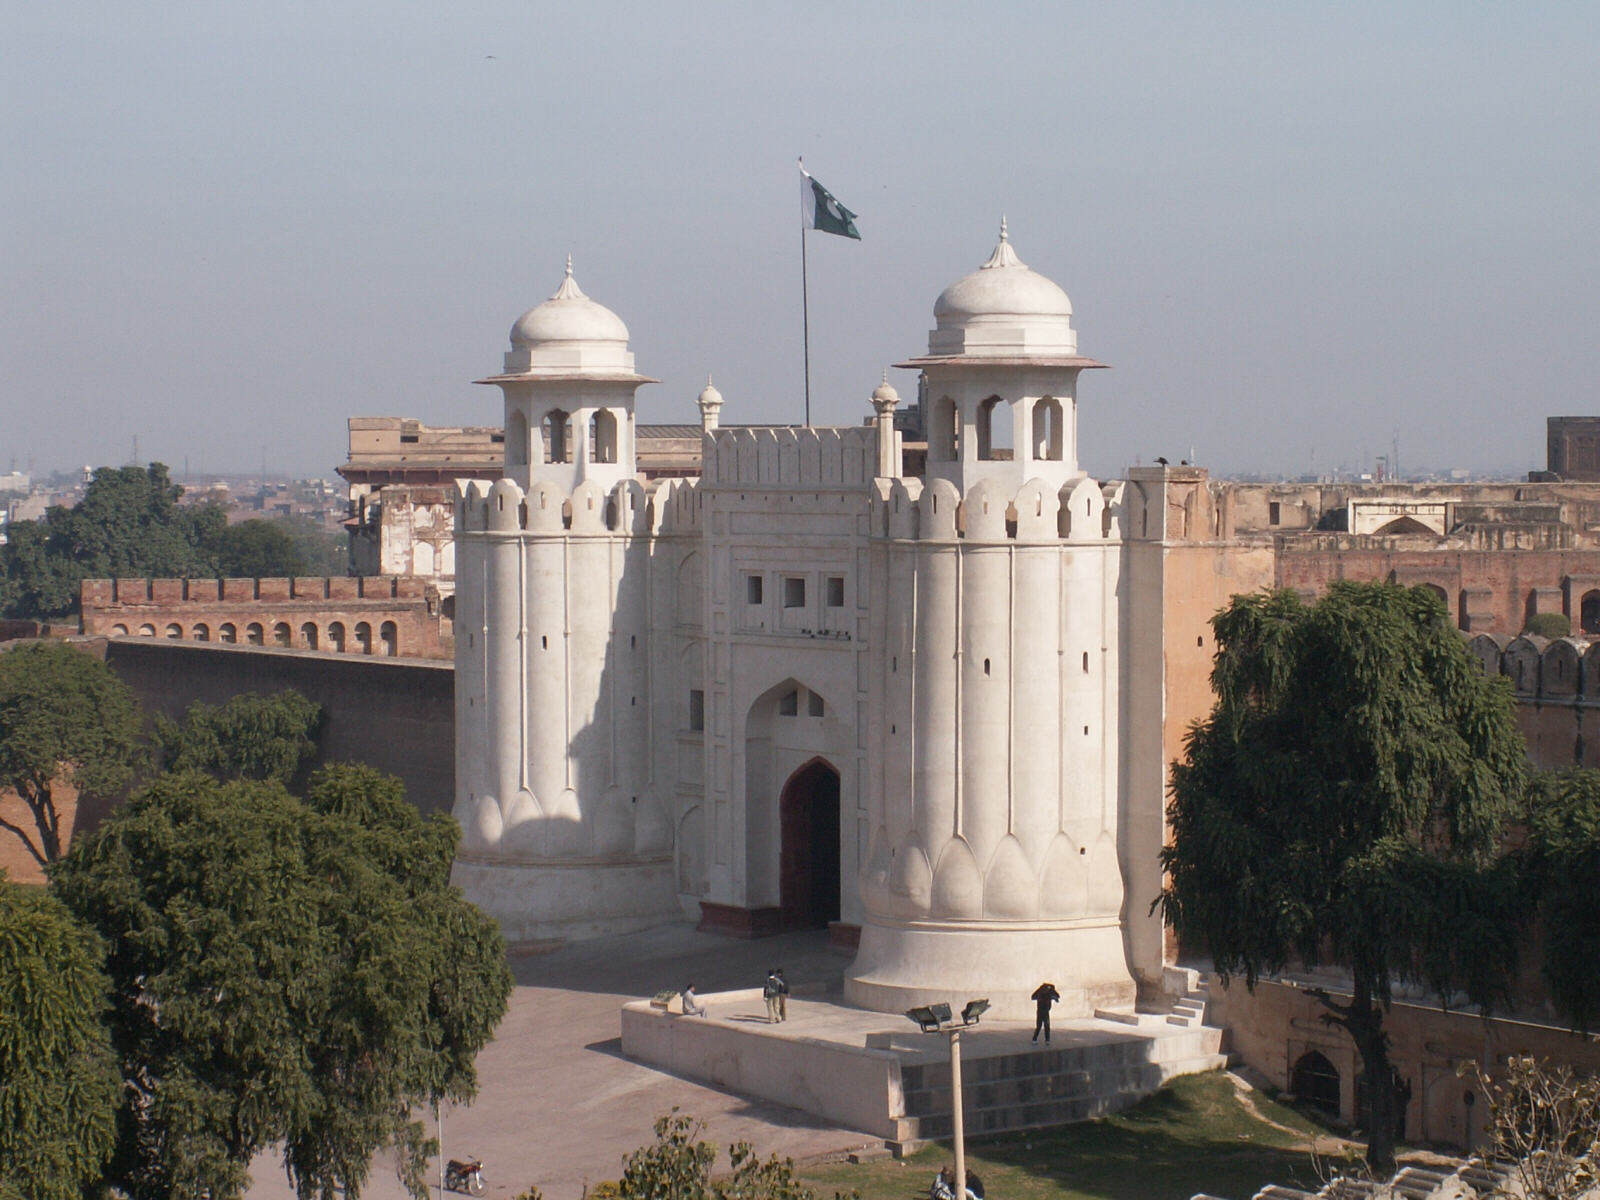 The gate of Lahore fort, Pakistan